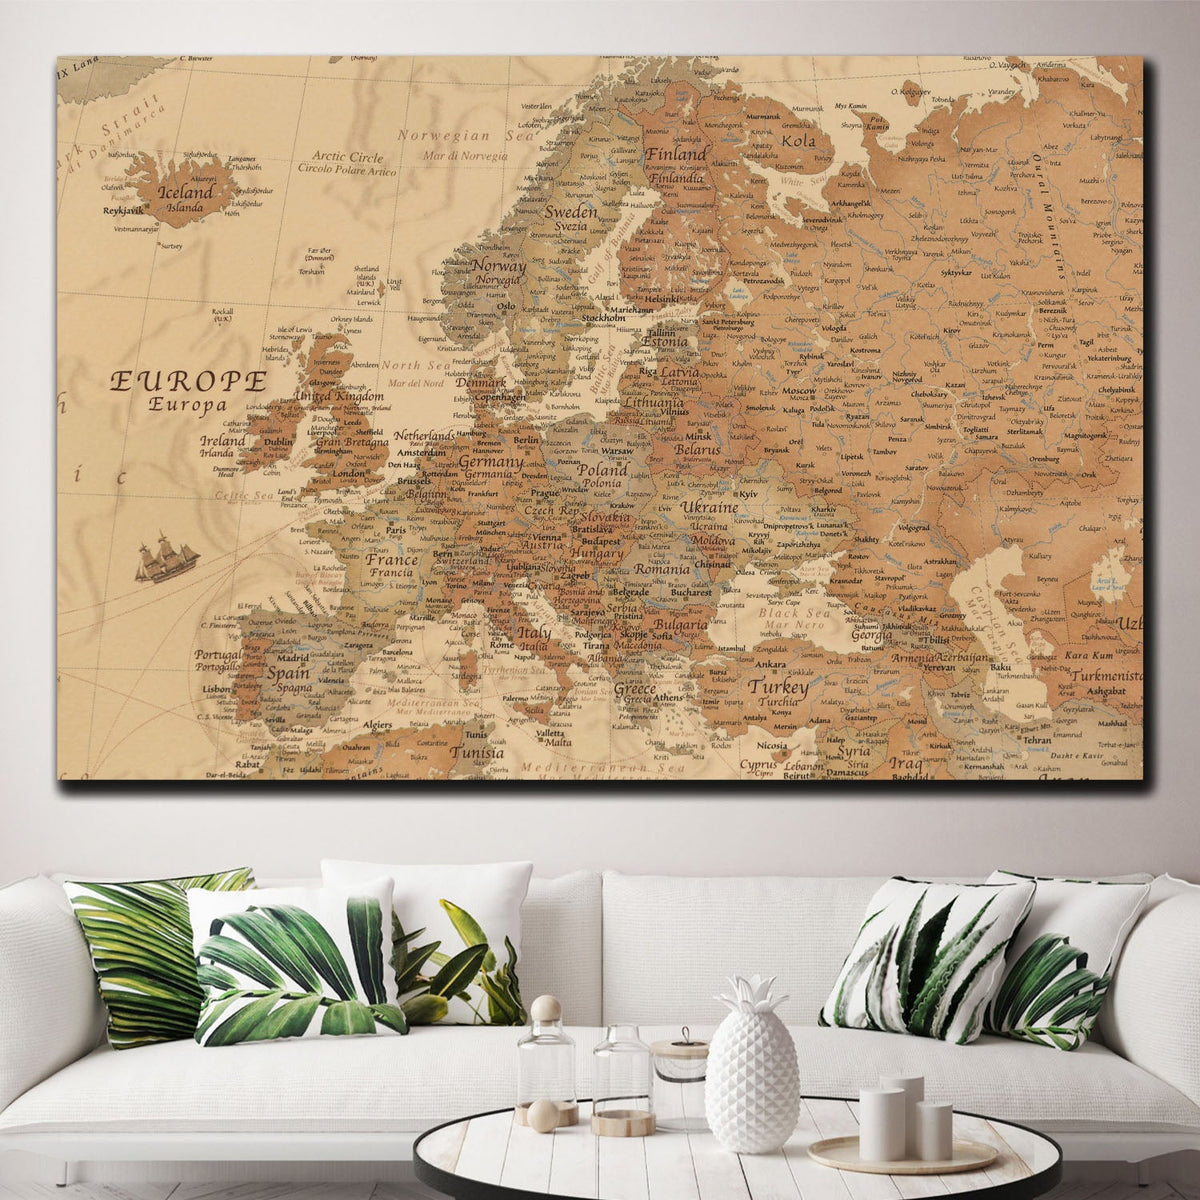 https://cdn.shopify.com/s/files/1/0387/9986/8044/products/AncientGeographicalMapofEuropeCanvasArtprintStretched-2.jpg